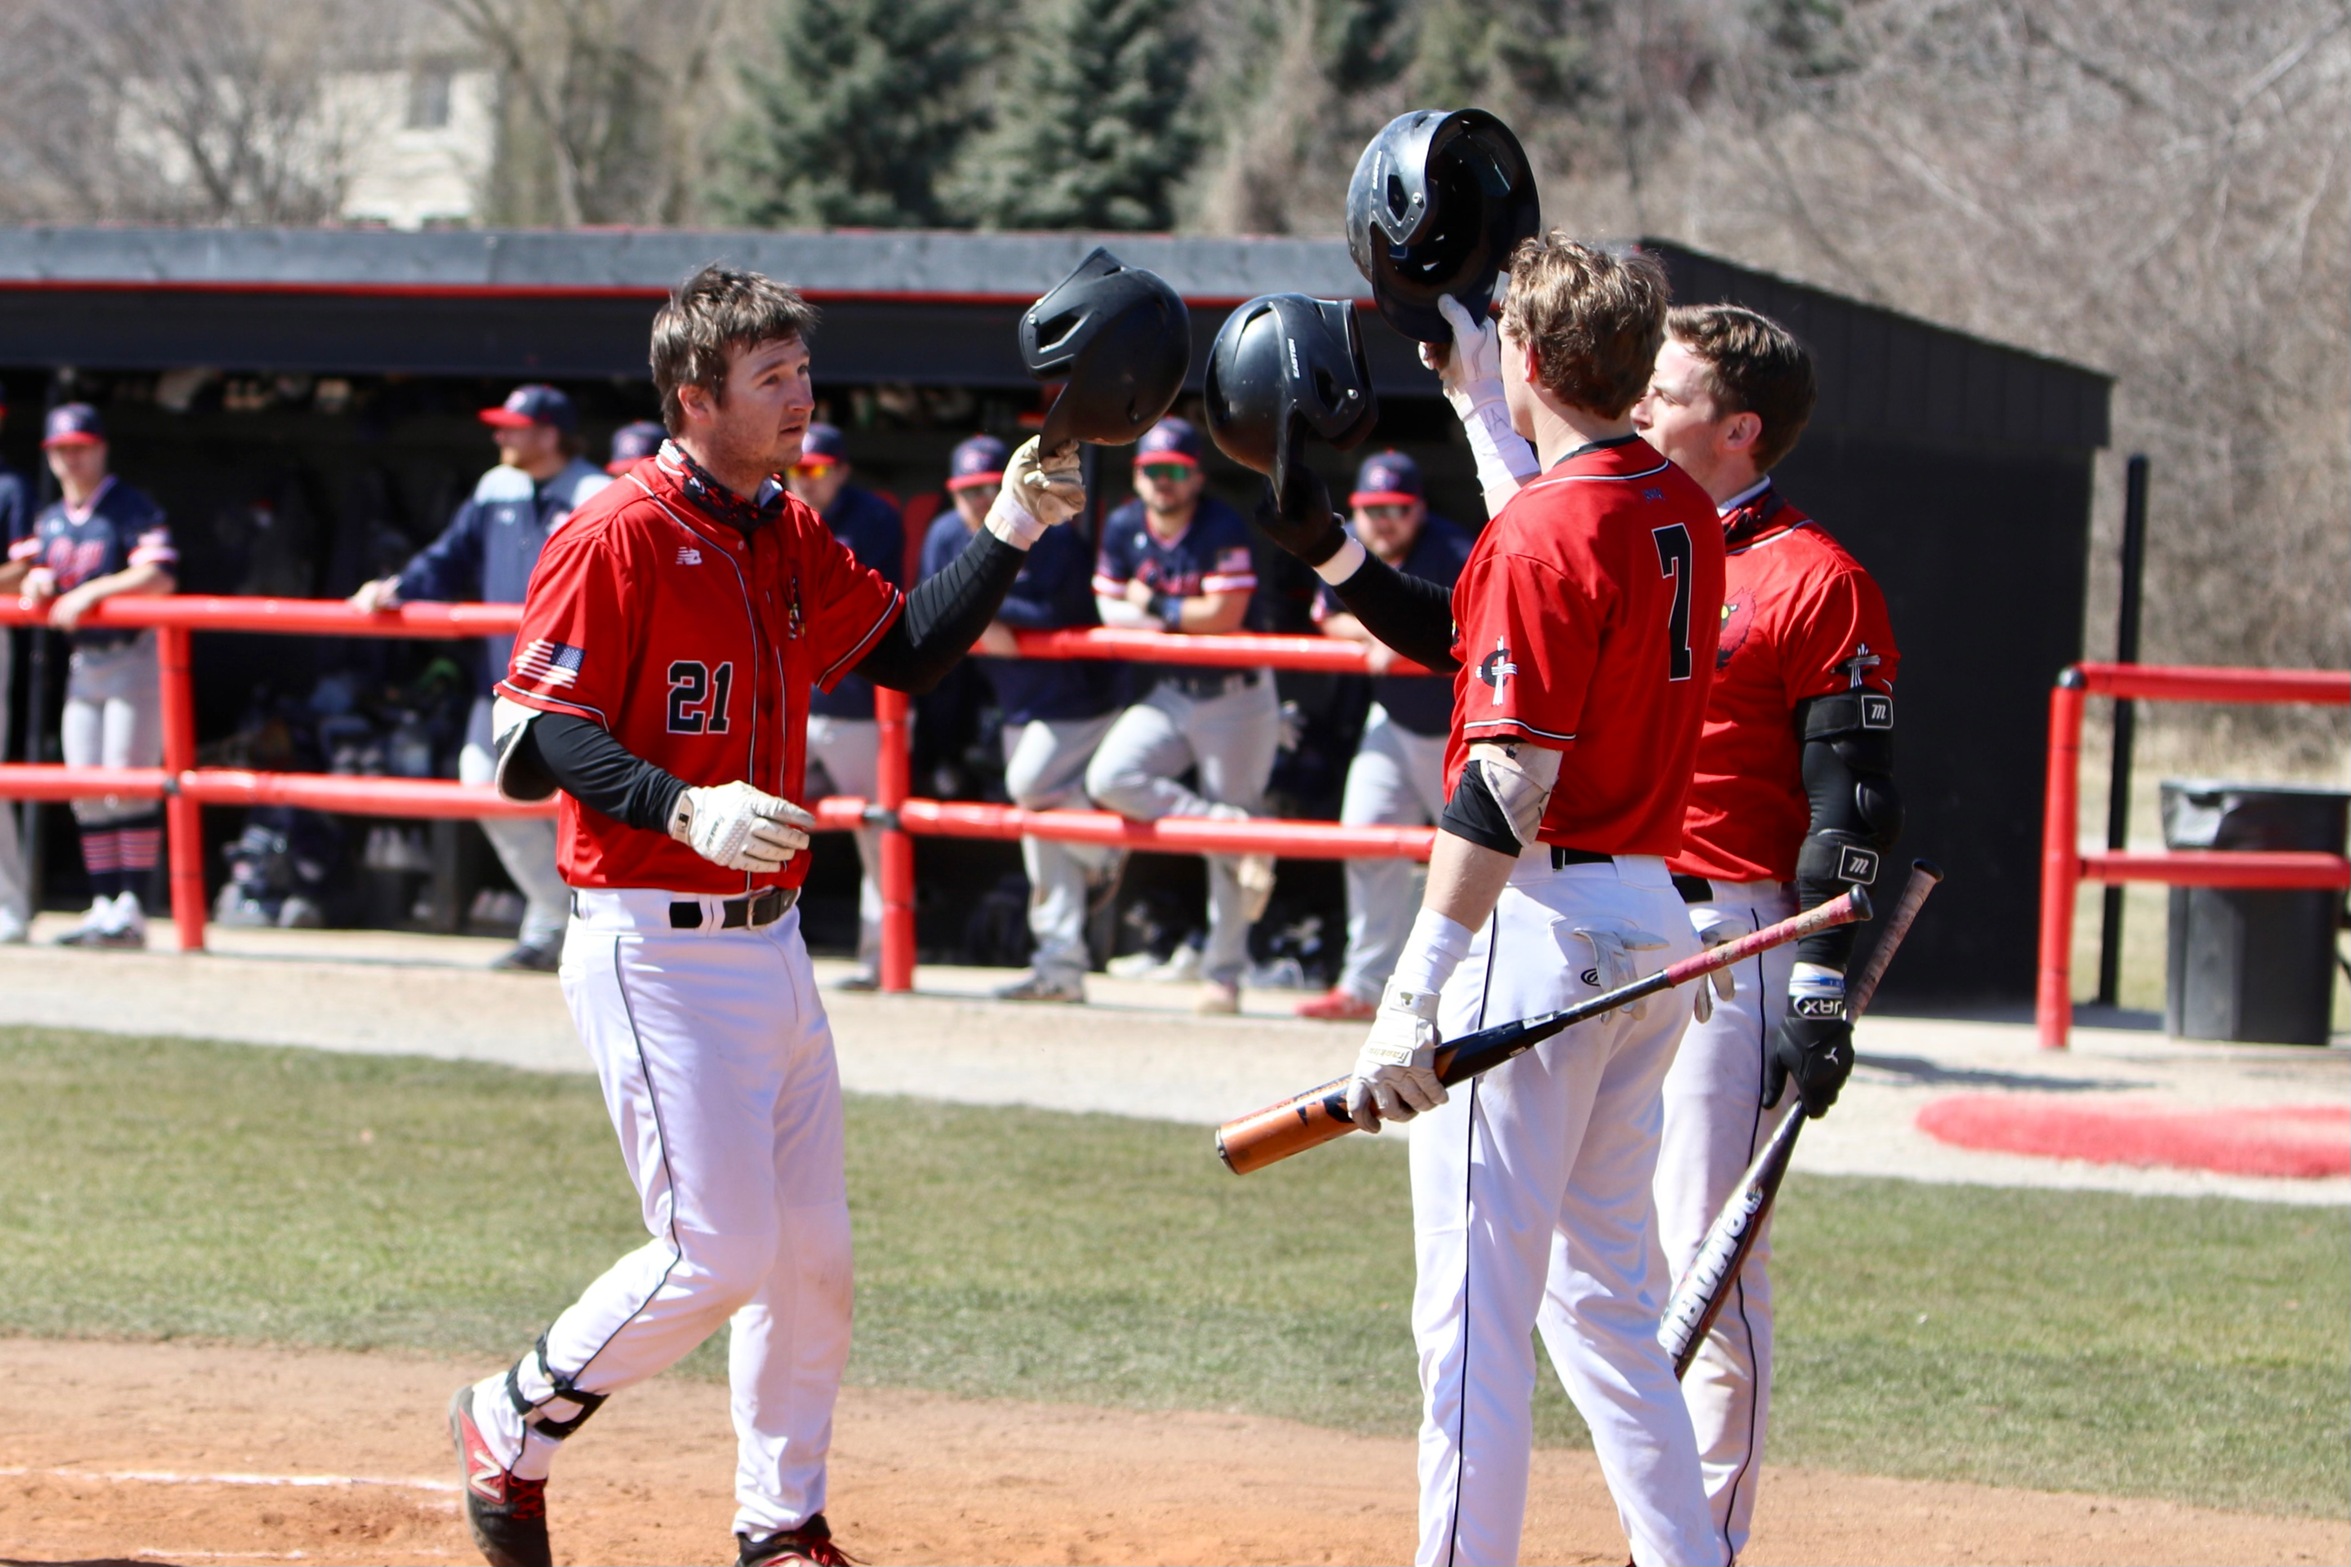 Grant Steinborn recorded 2 home runs and 4 RBIs in the wins over Cleary